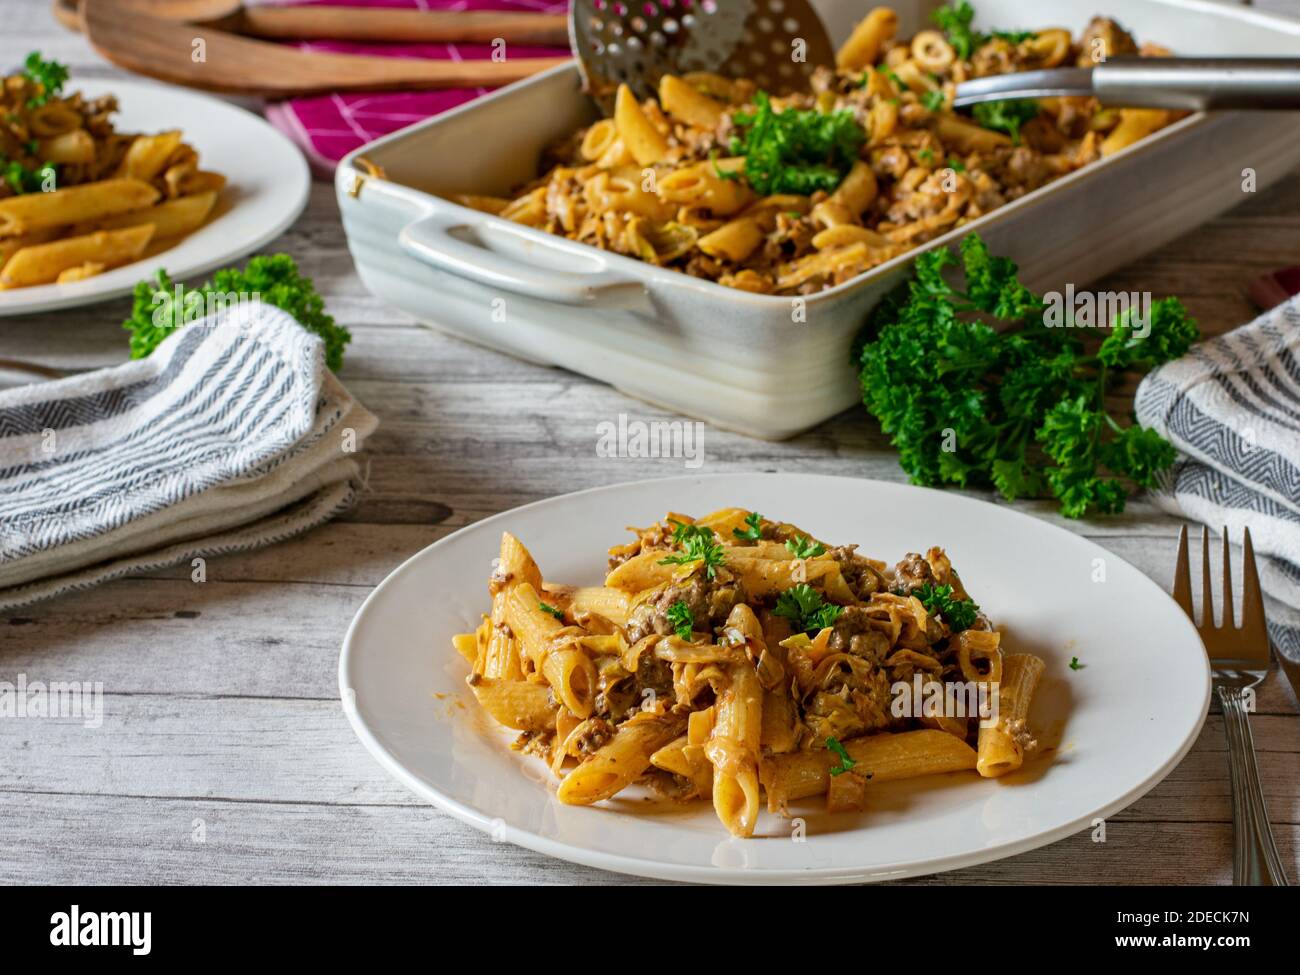 Pasta with minced meat and cabbage served on a dinner table with plates, cutlery, napkin and casserole Stock Photo